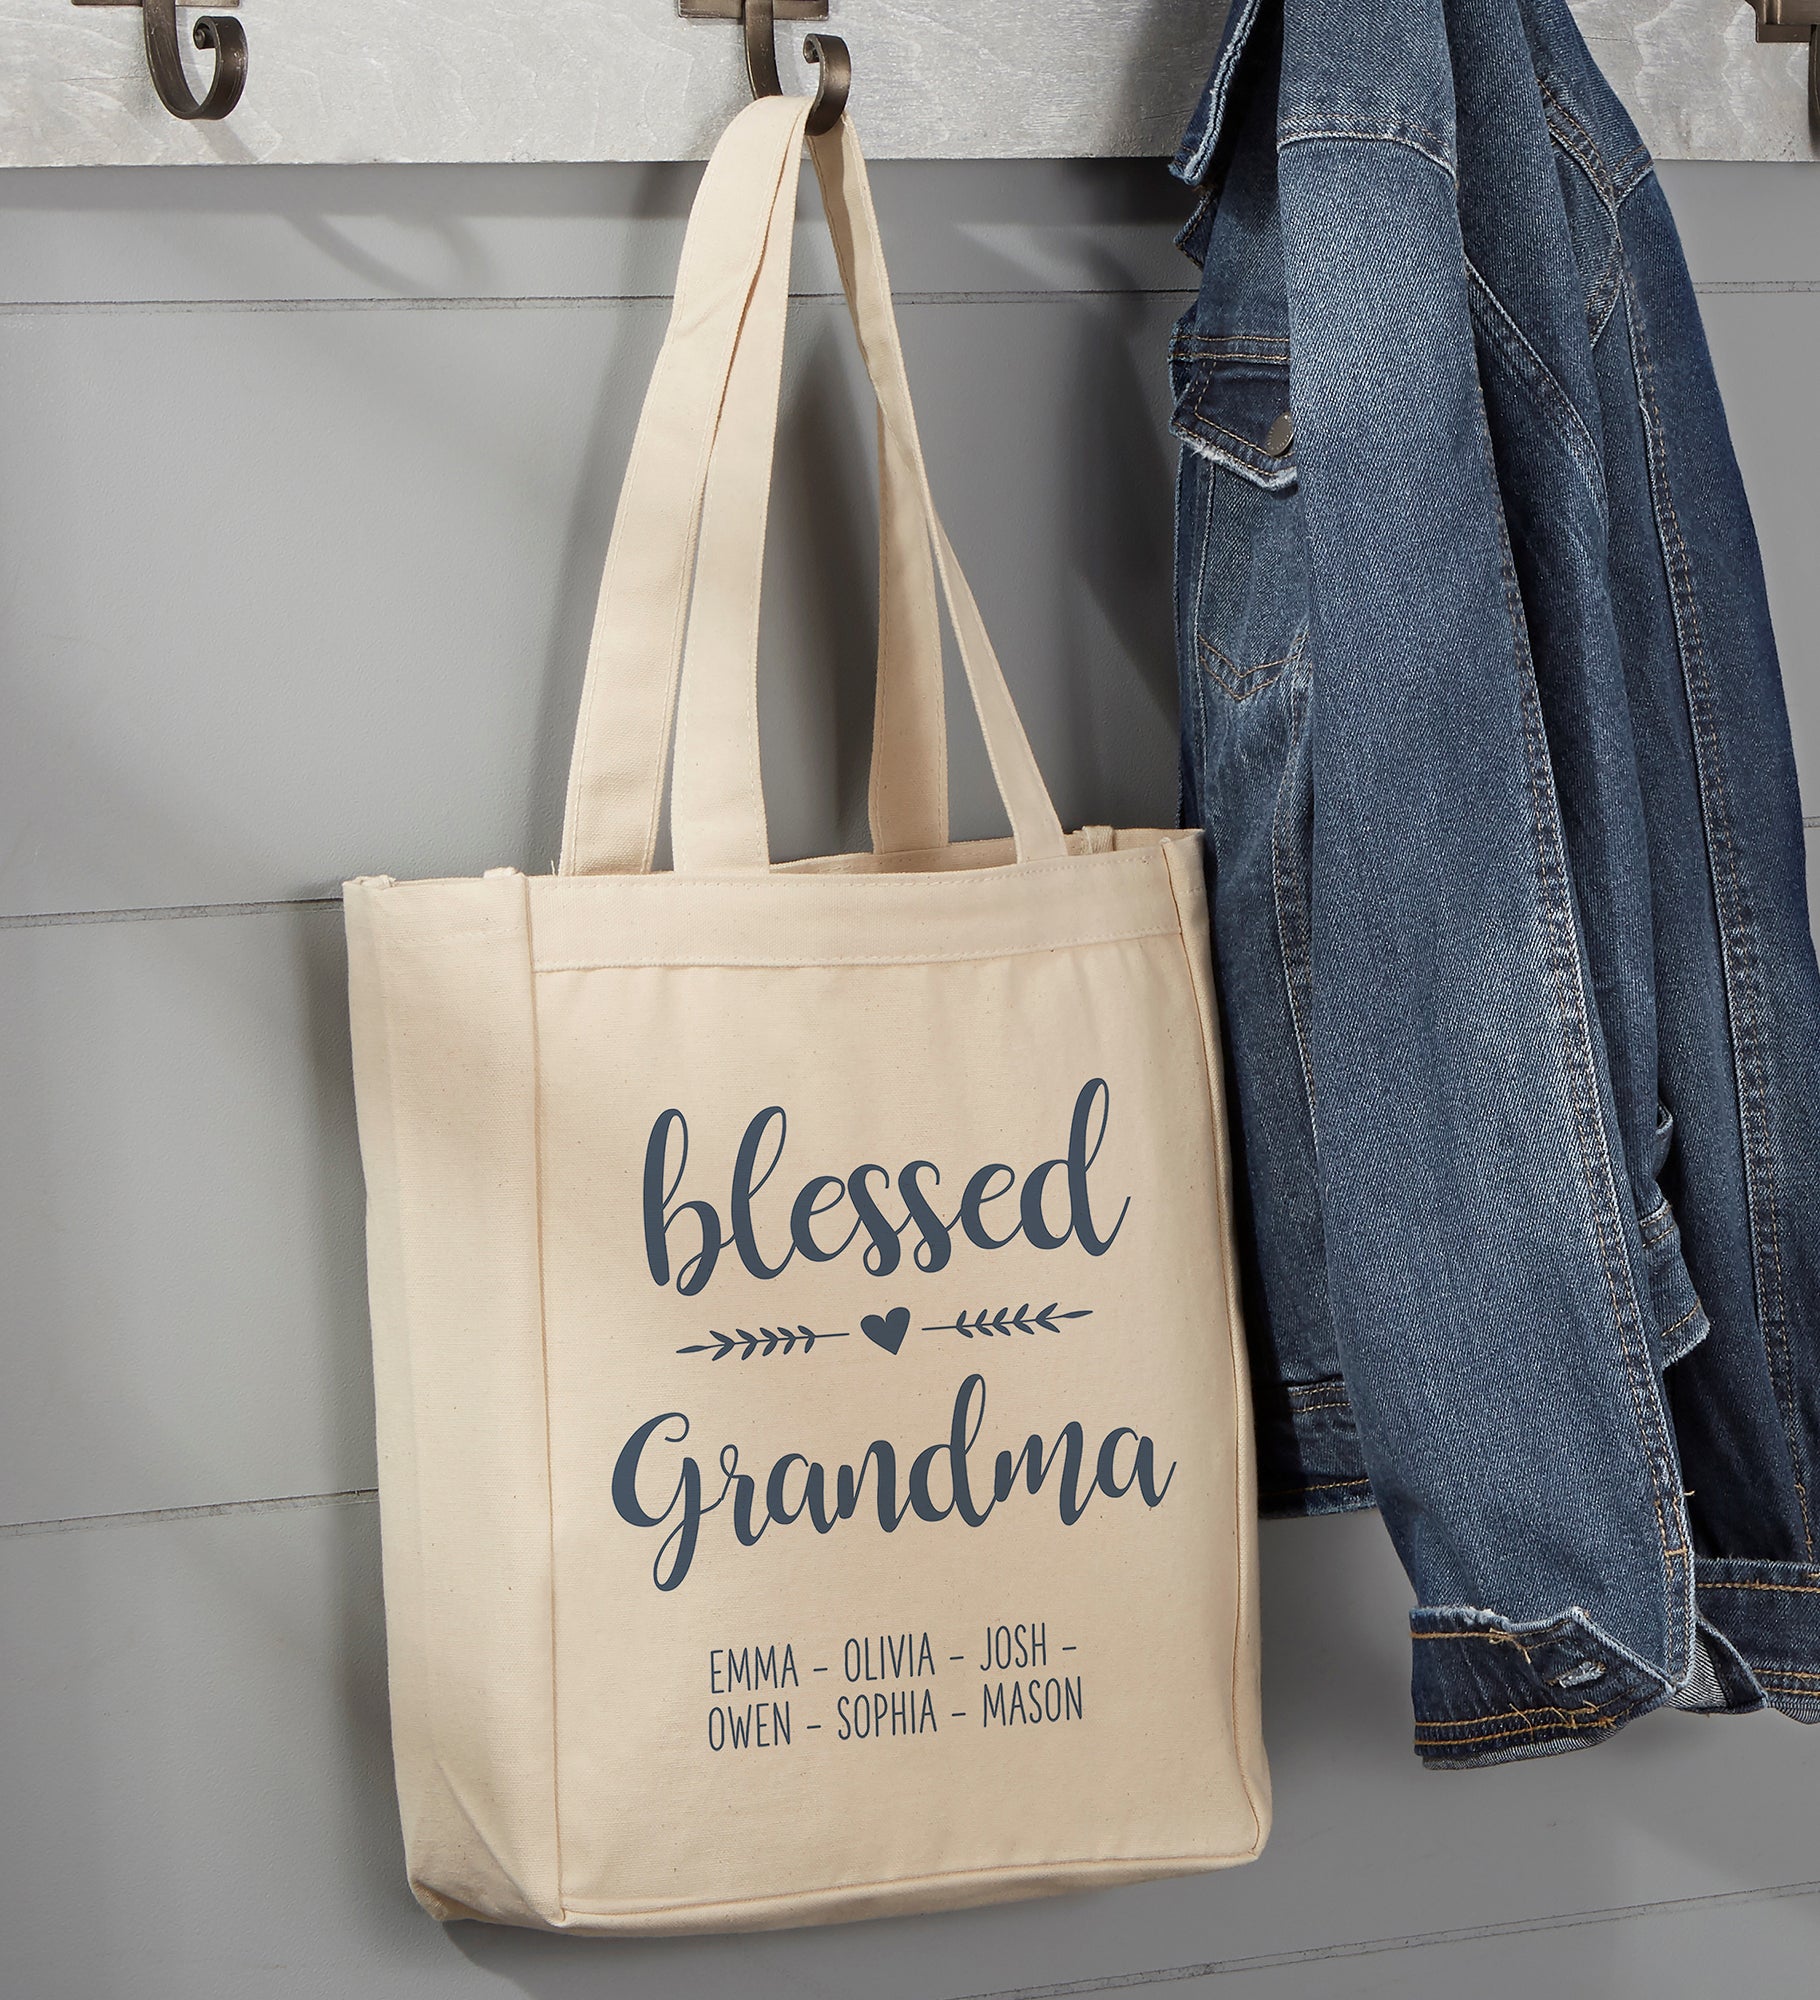 Blessed Grandma Personalized Canvas Tote Bags